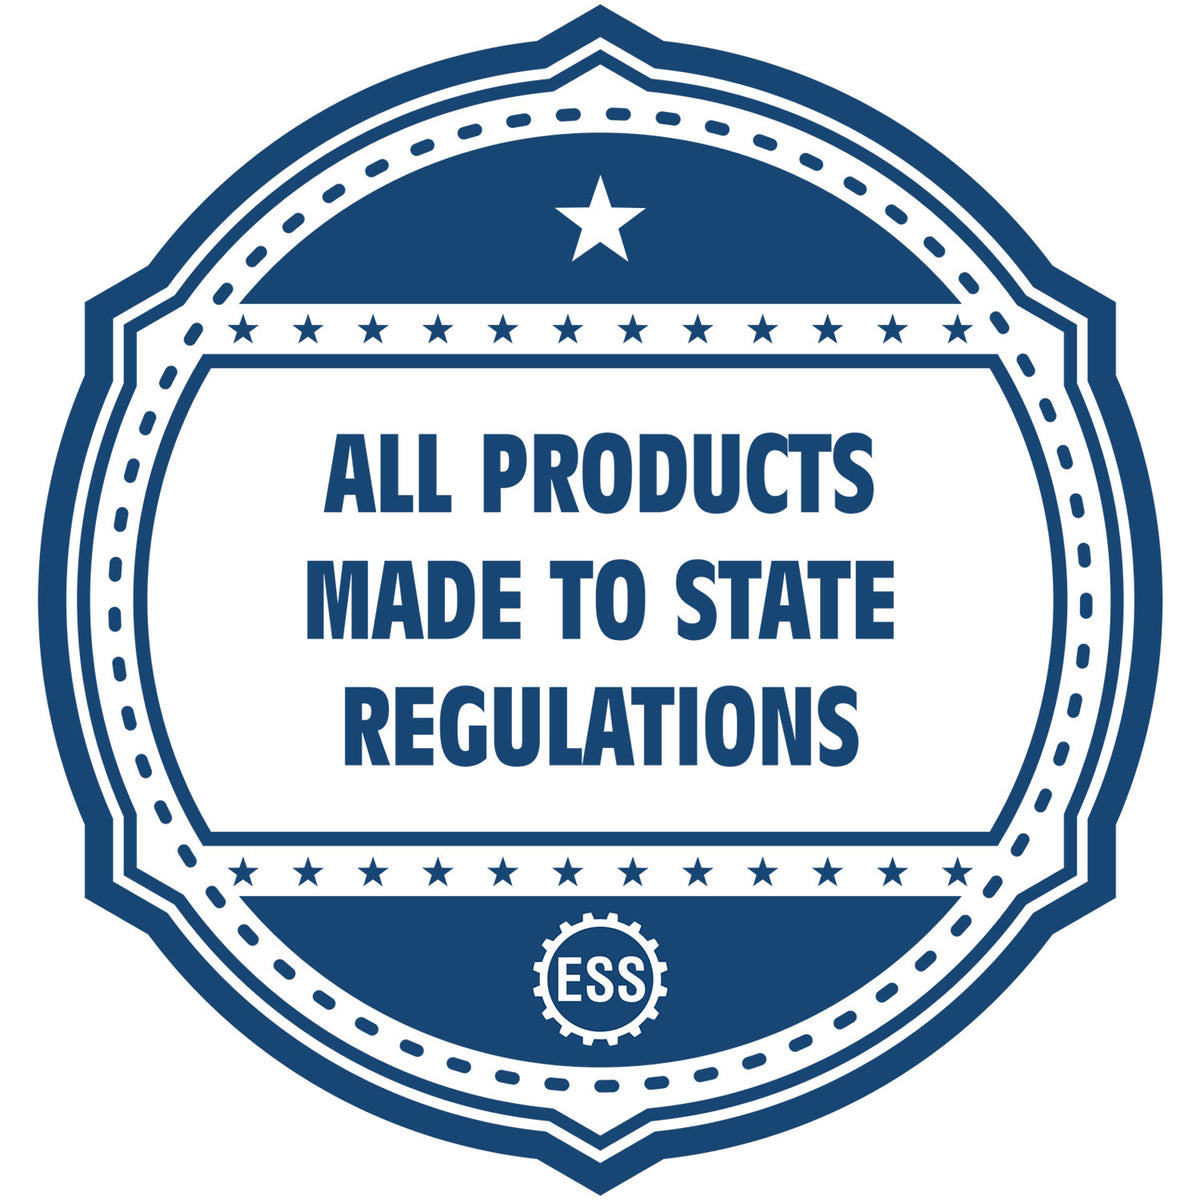 An icon or badge element for the Extended Long Reach Utah Architect Seal Embosser showing that this product is made in compliance with state regulations.